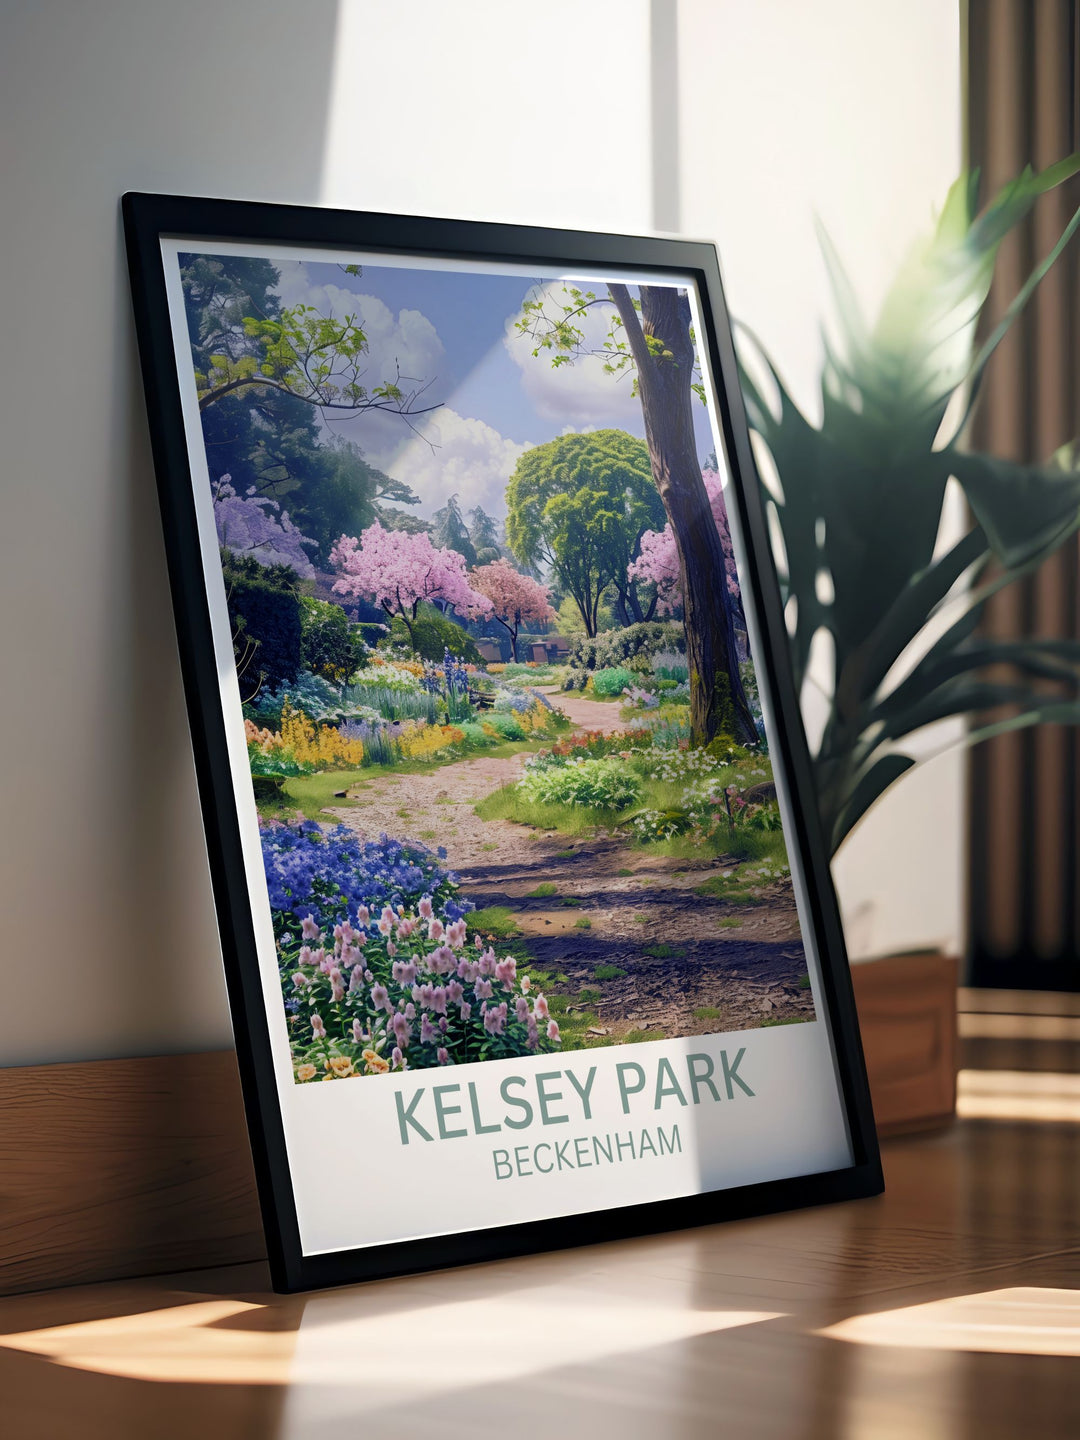 Custom print of Beckenhams Kelsey Park capturing the serene lake and wildlife perfect for nature enthusiasts